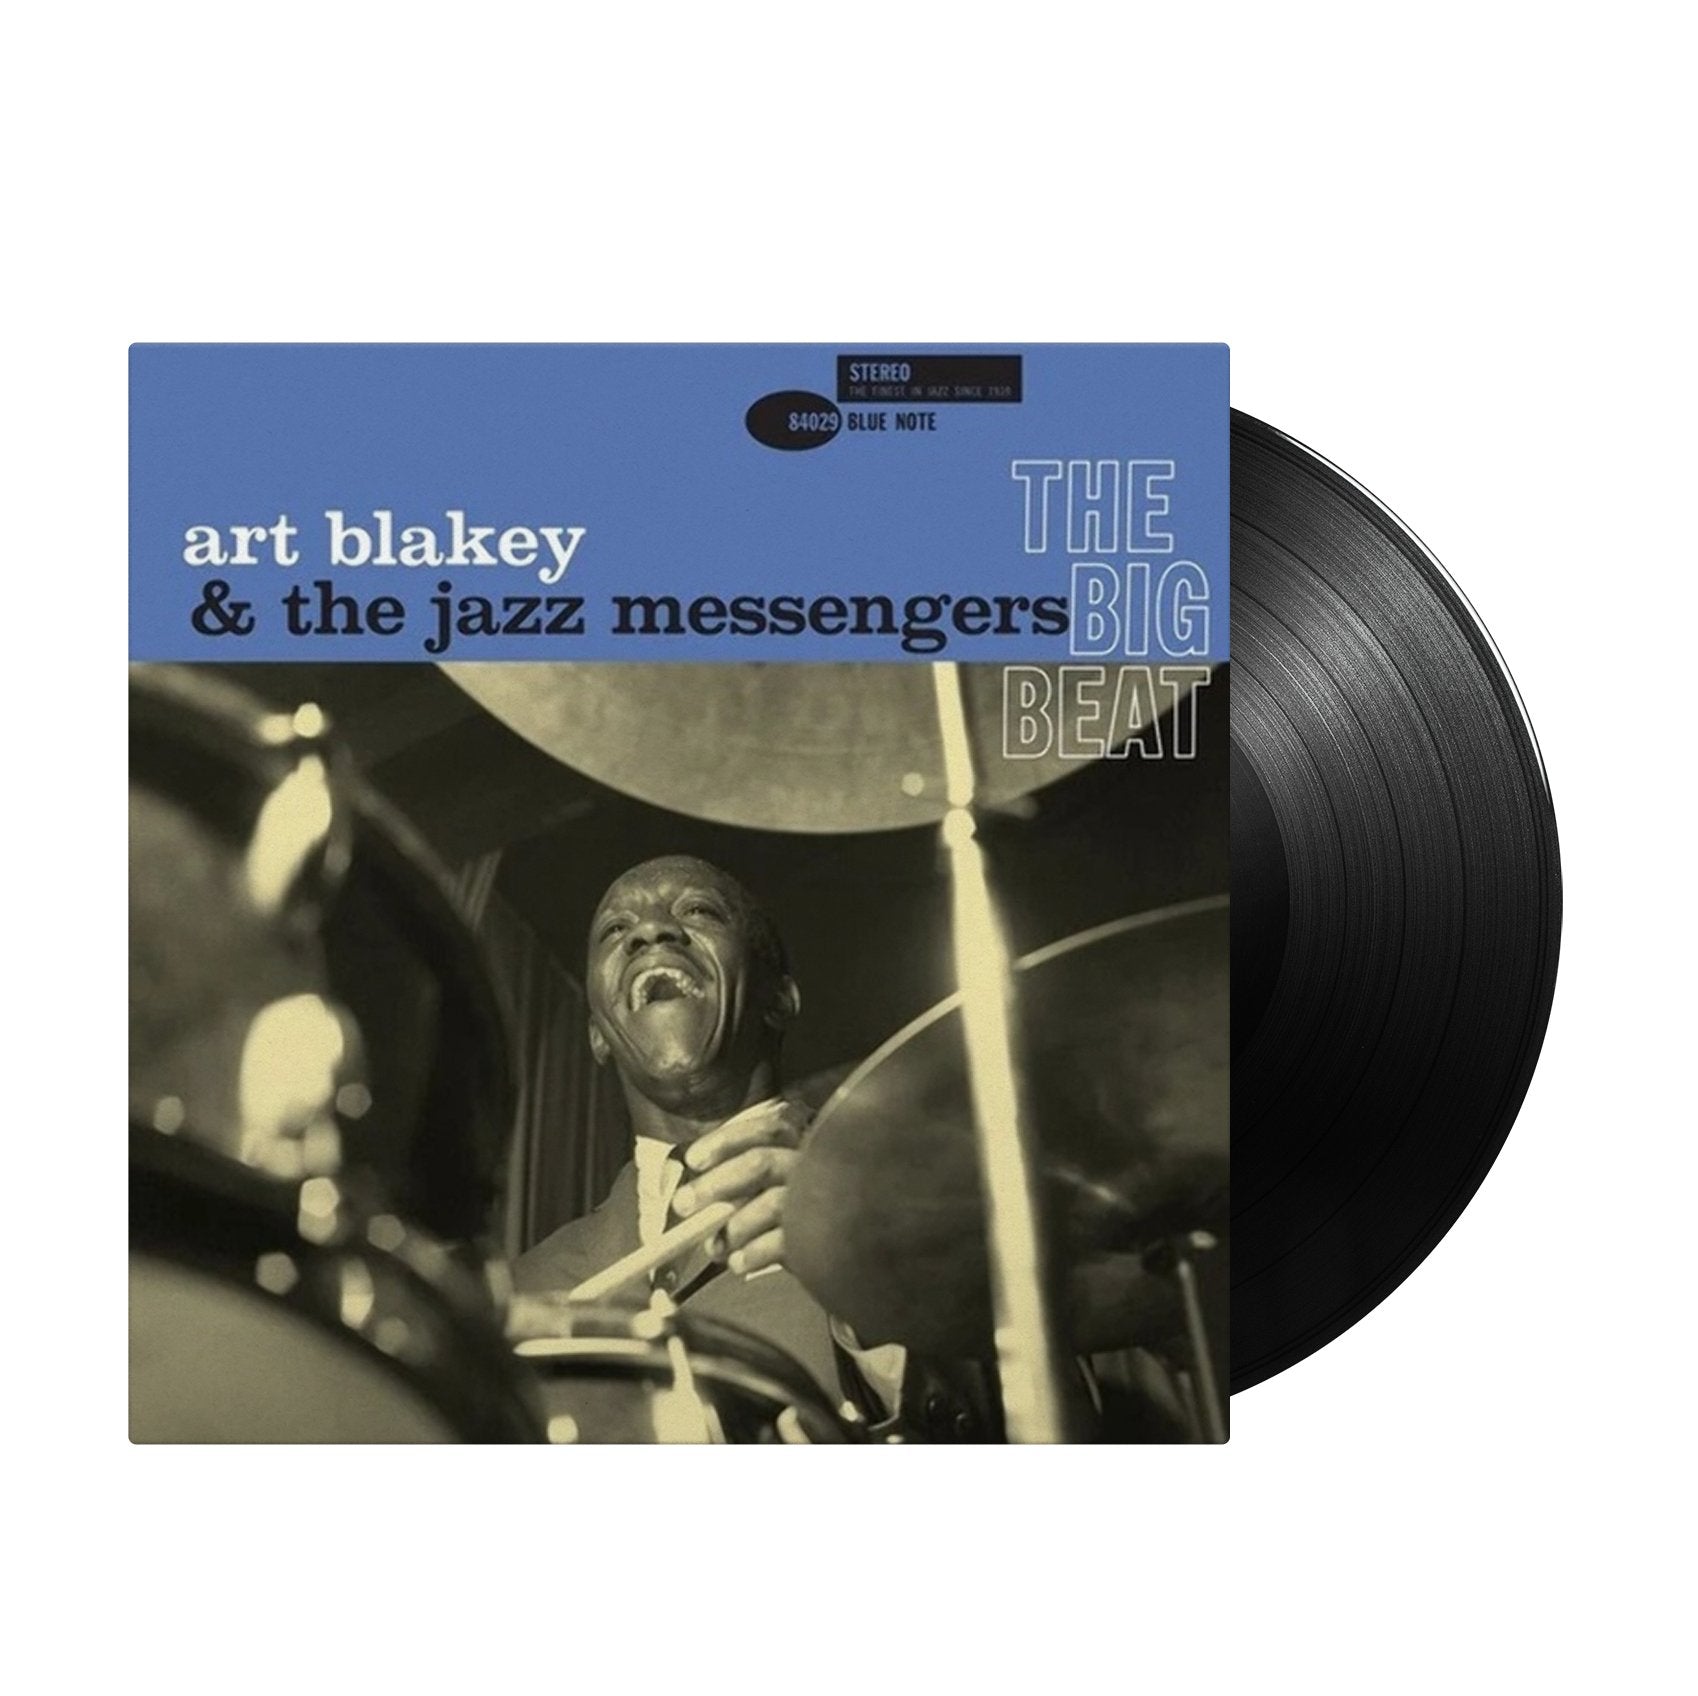 ART BLAKEY AND THE JAZZ MESSENGERS - The Big Beat - Inner Ocean Records